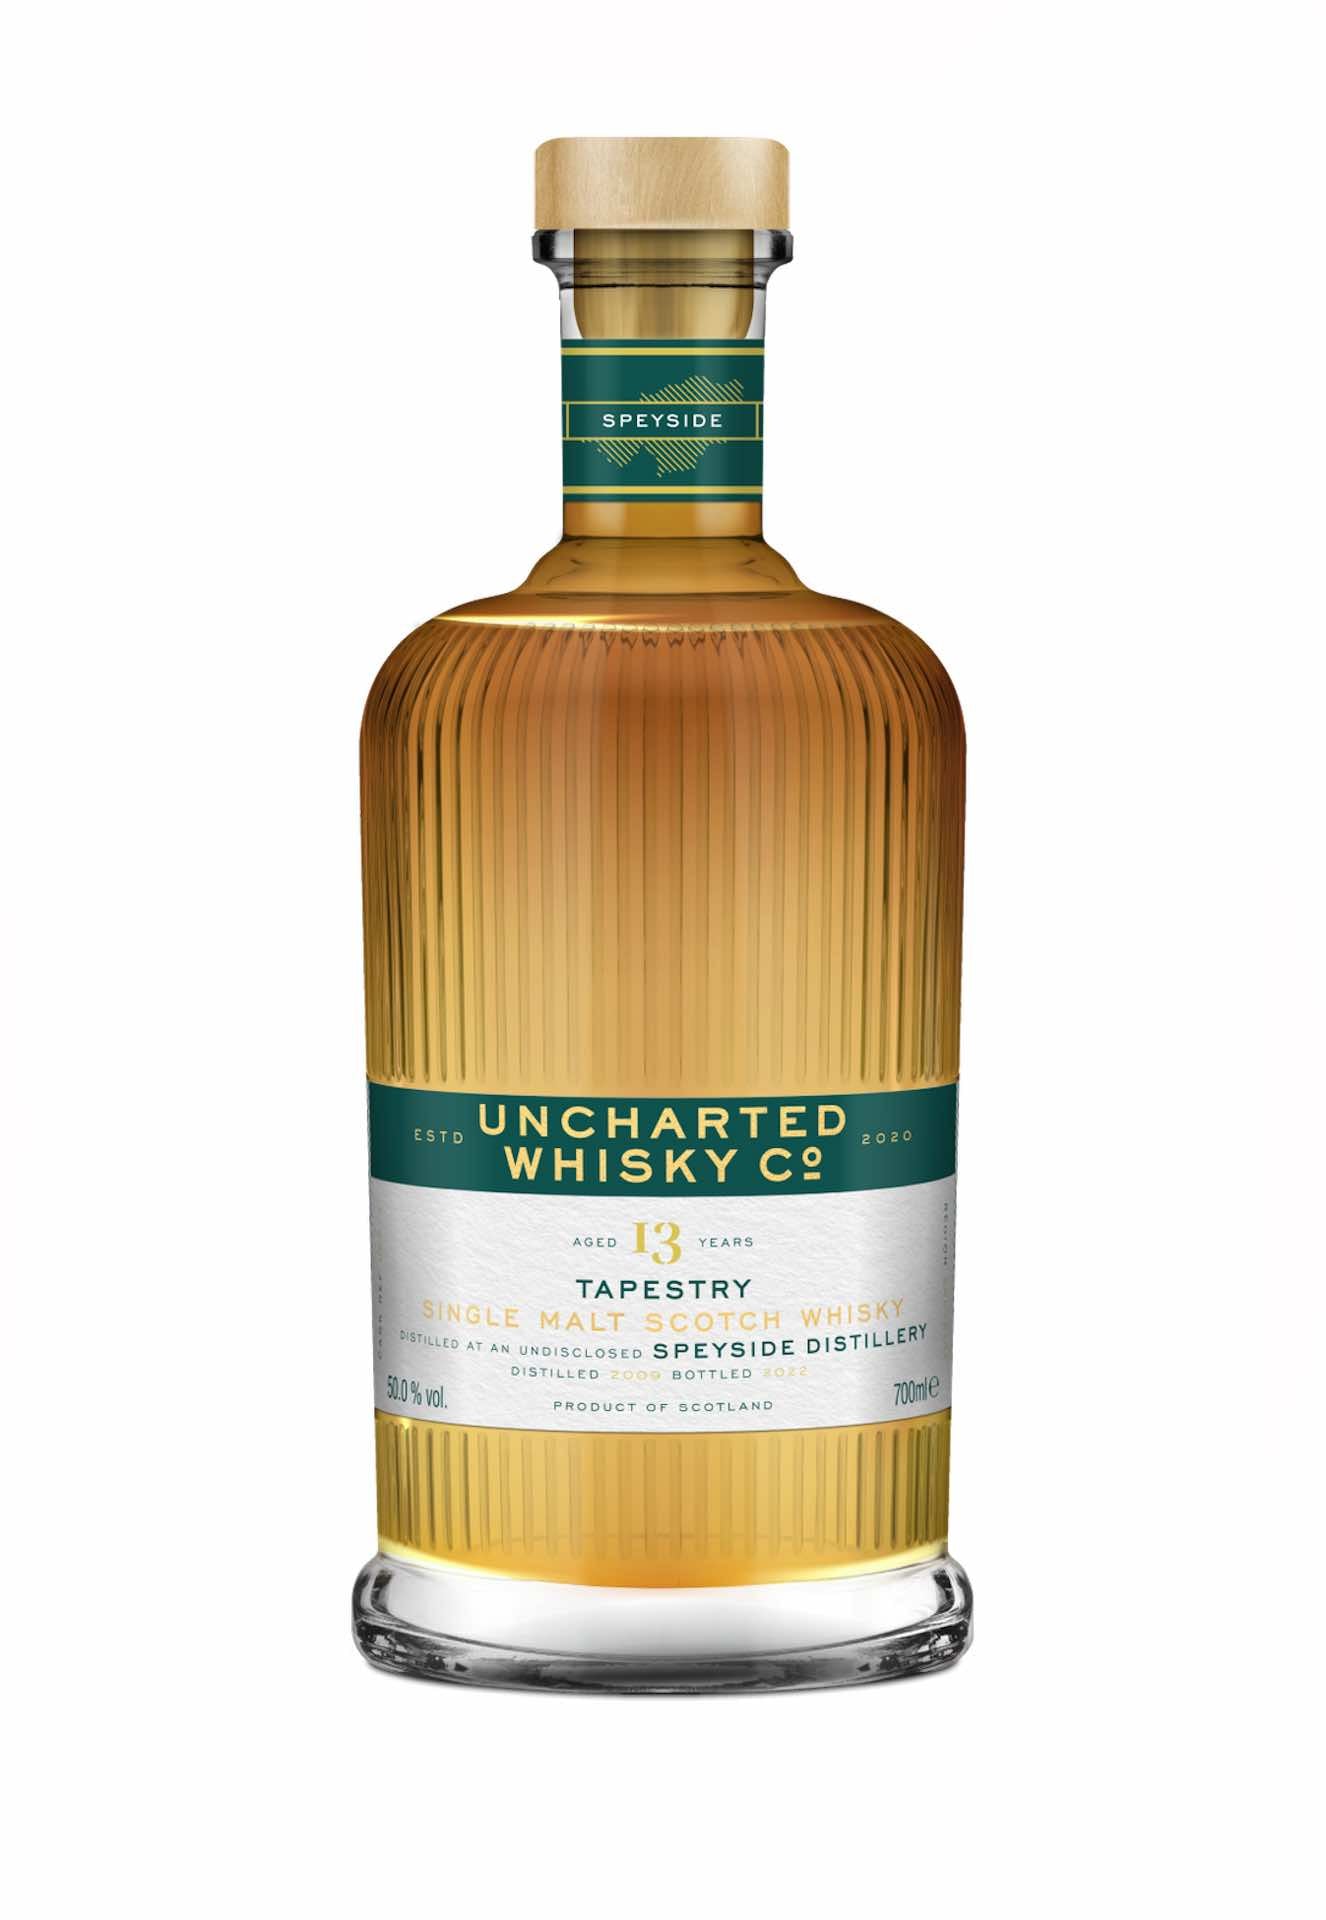 Uncharted Whisky Co, Tapestry, Speyside 13 Year Old